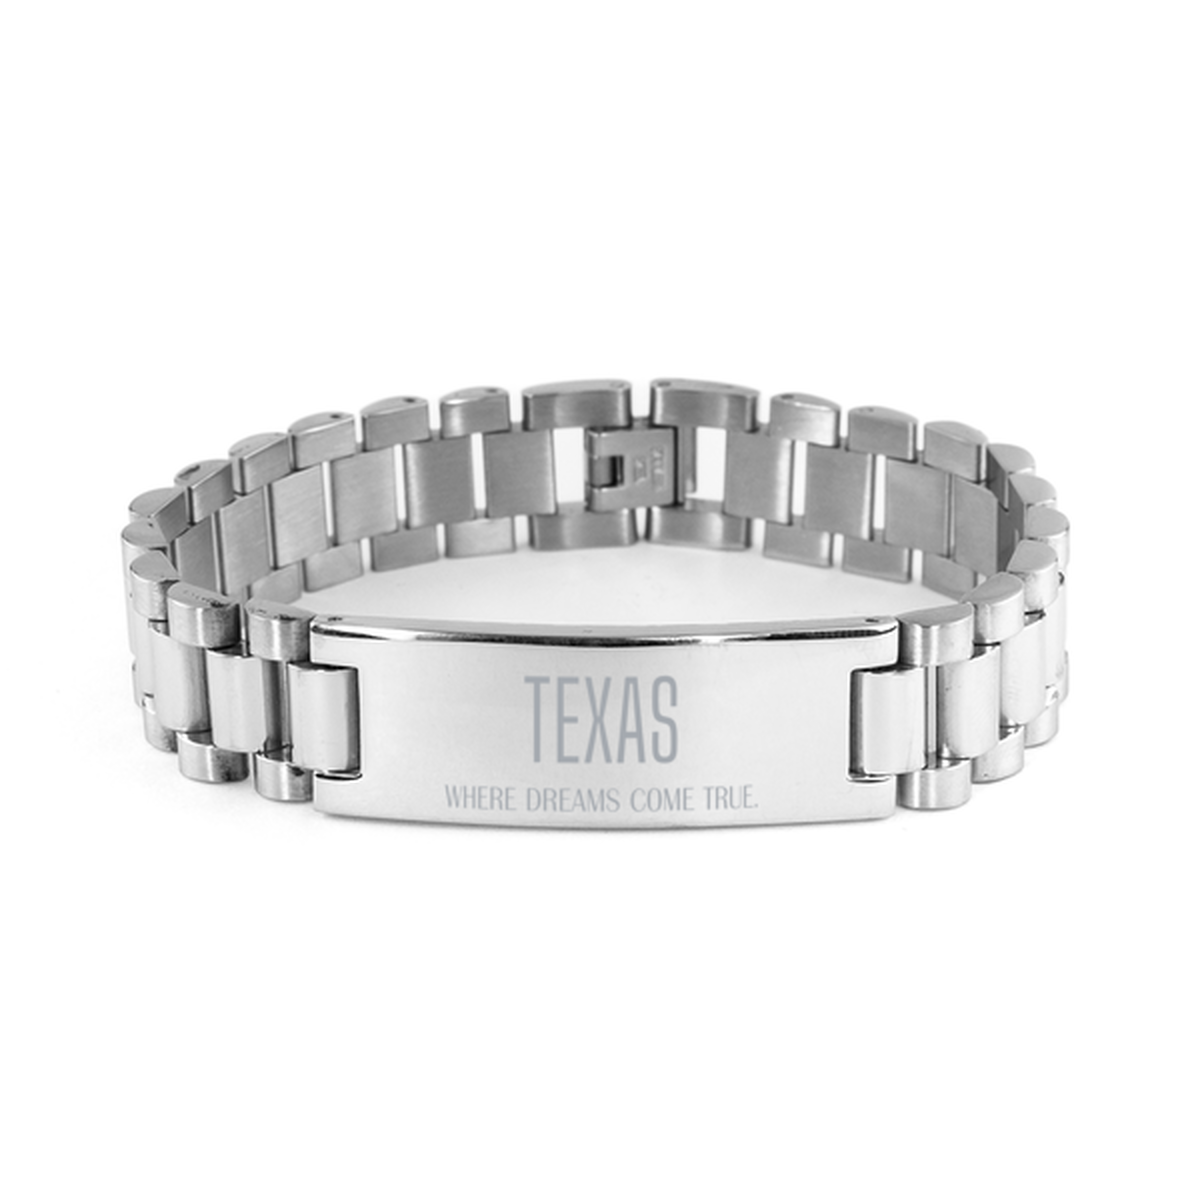 Love Texas State Ladder Stainless Steel Bracelet, Texas Where dreams come true, Birthday Inspirational Gifts For Texas Men, Women, Friends